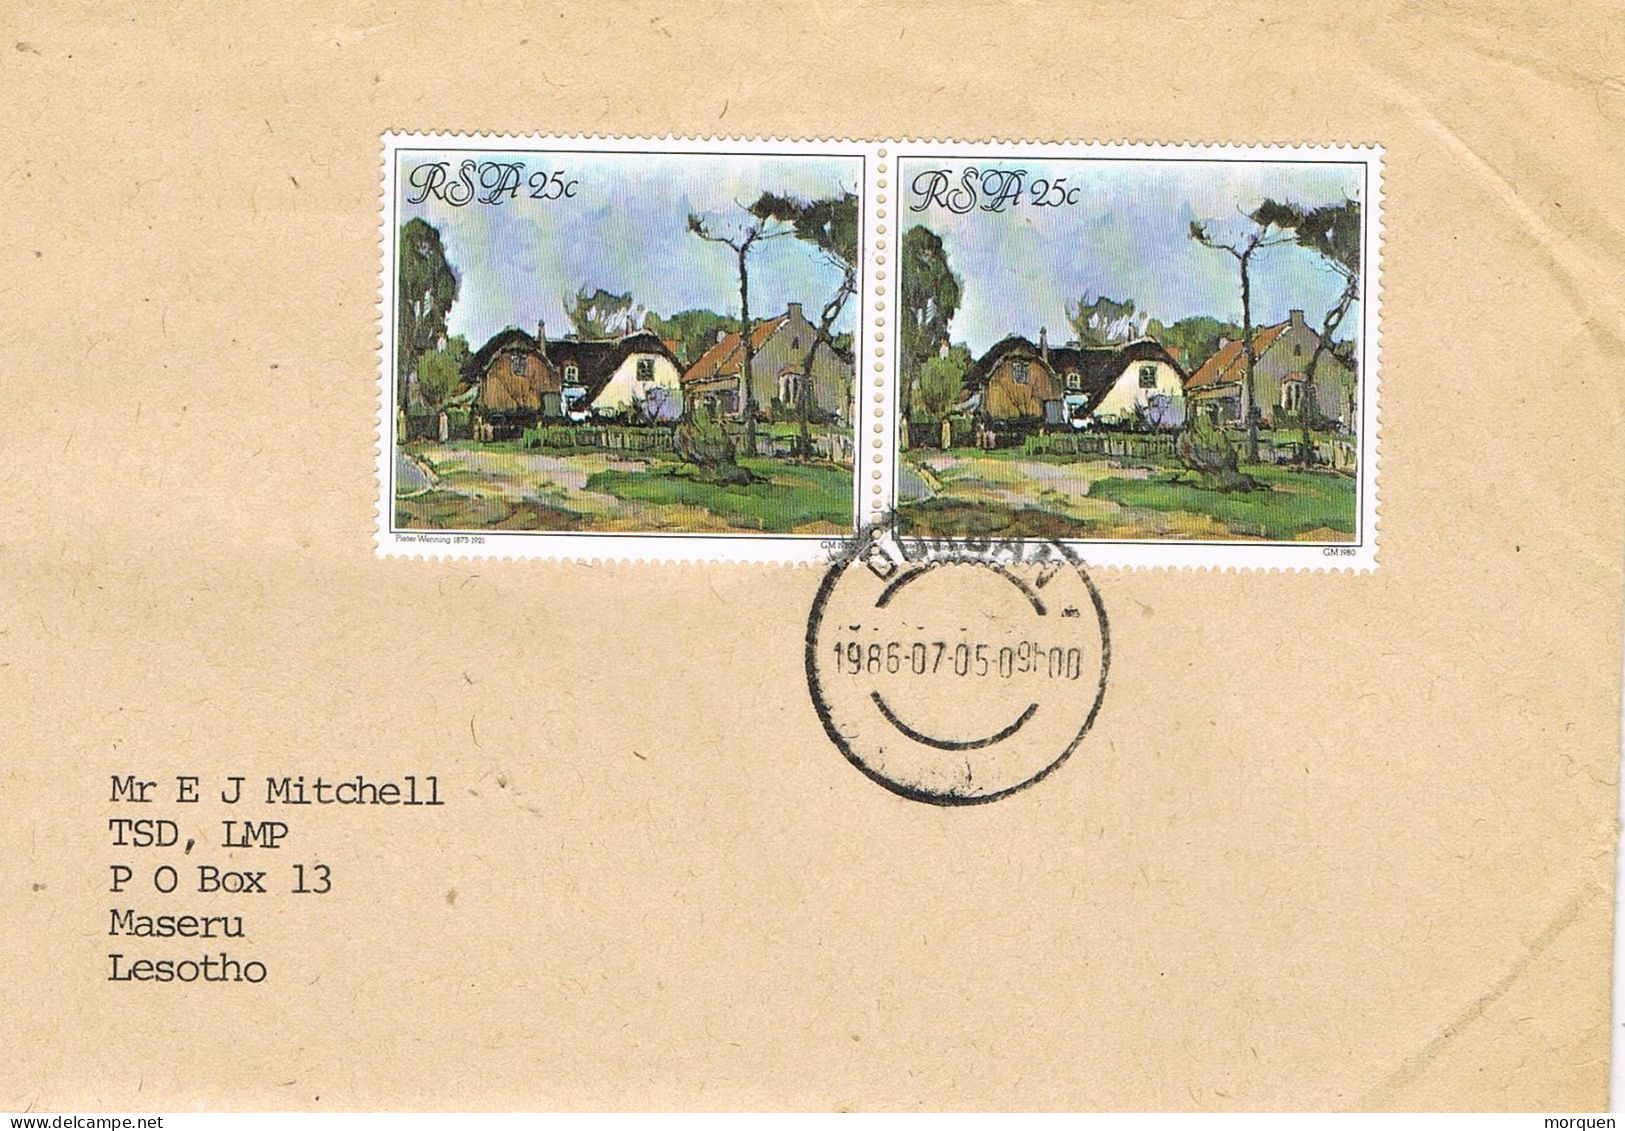 54159. Carta DURBAN (Soith Africa) 1986 To Lesotho - Covers & Documents